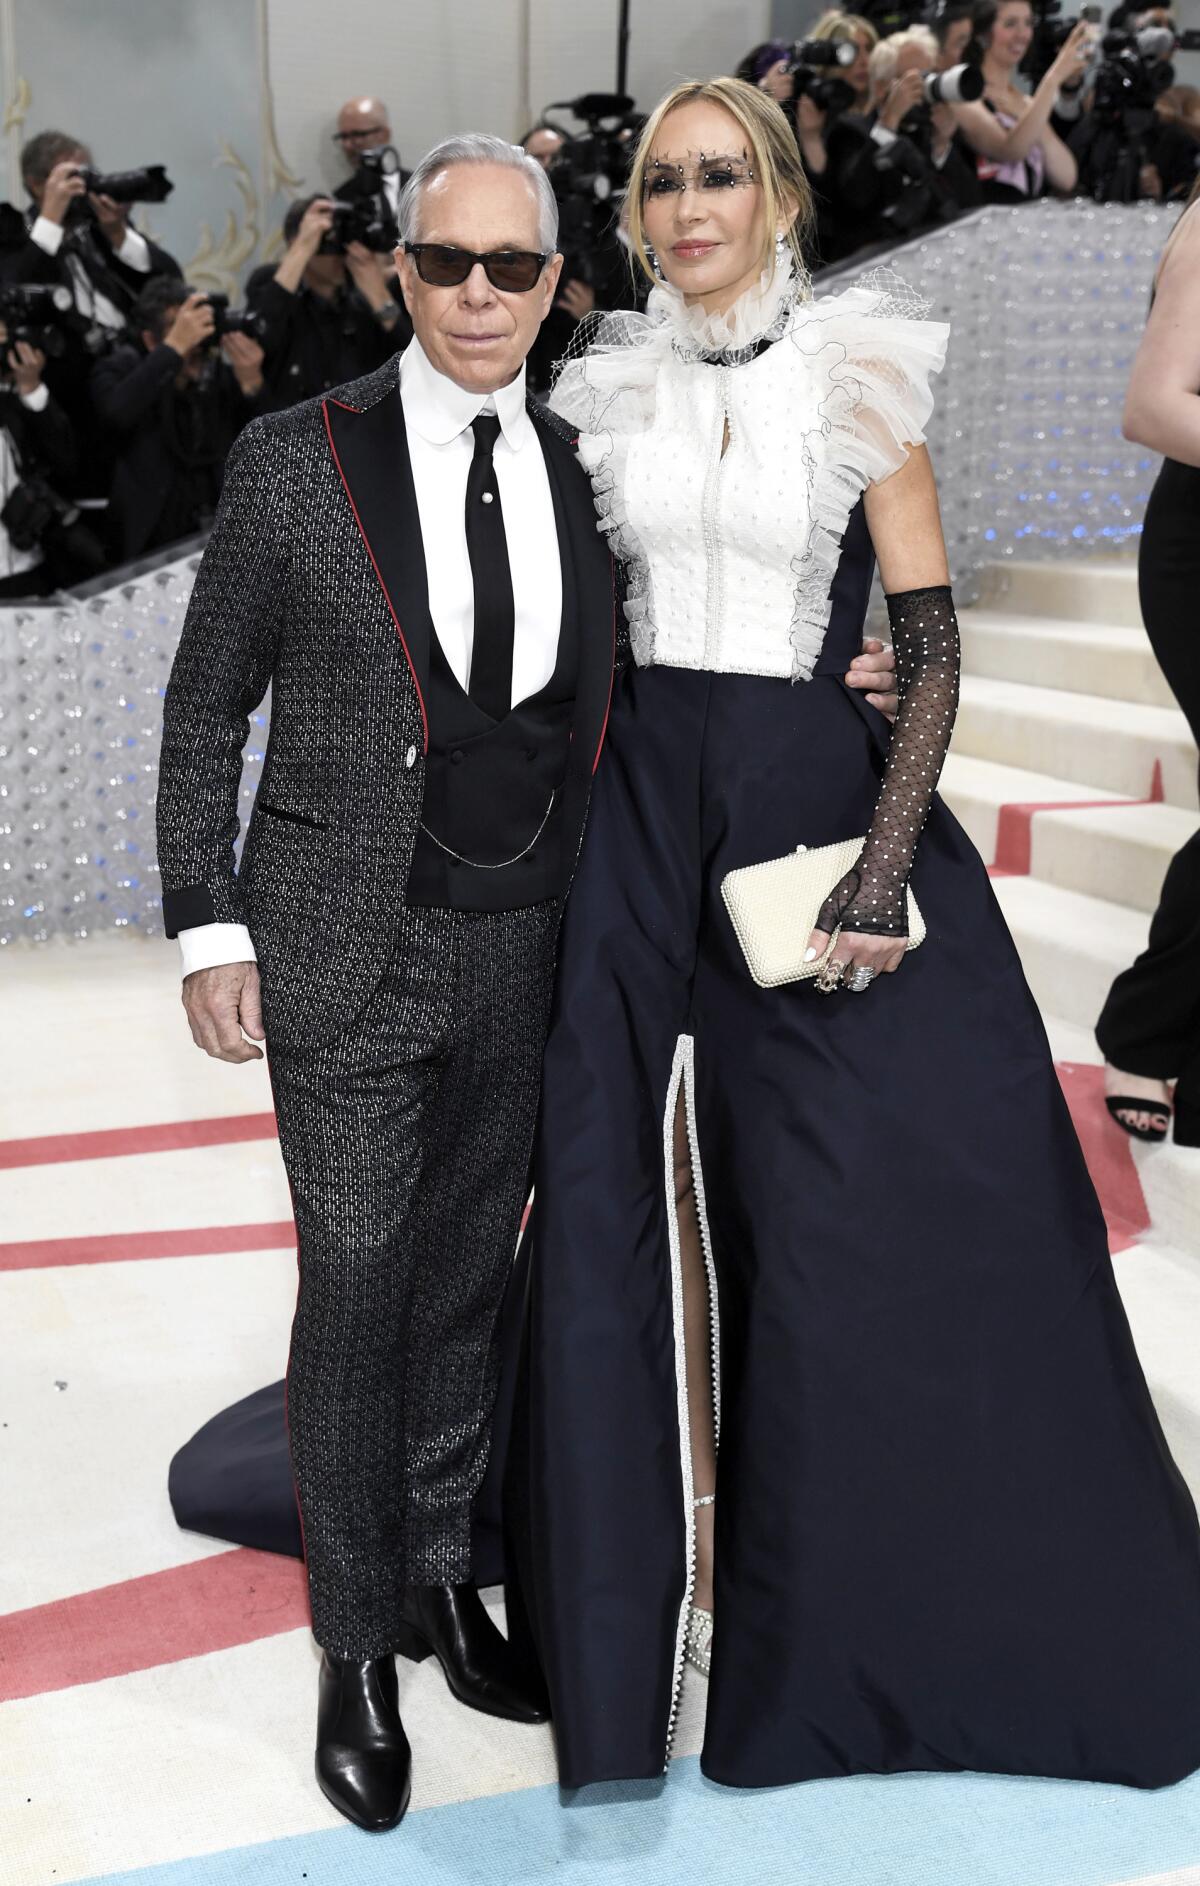 Tommy Hilfiger and Dee Ocleppo